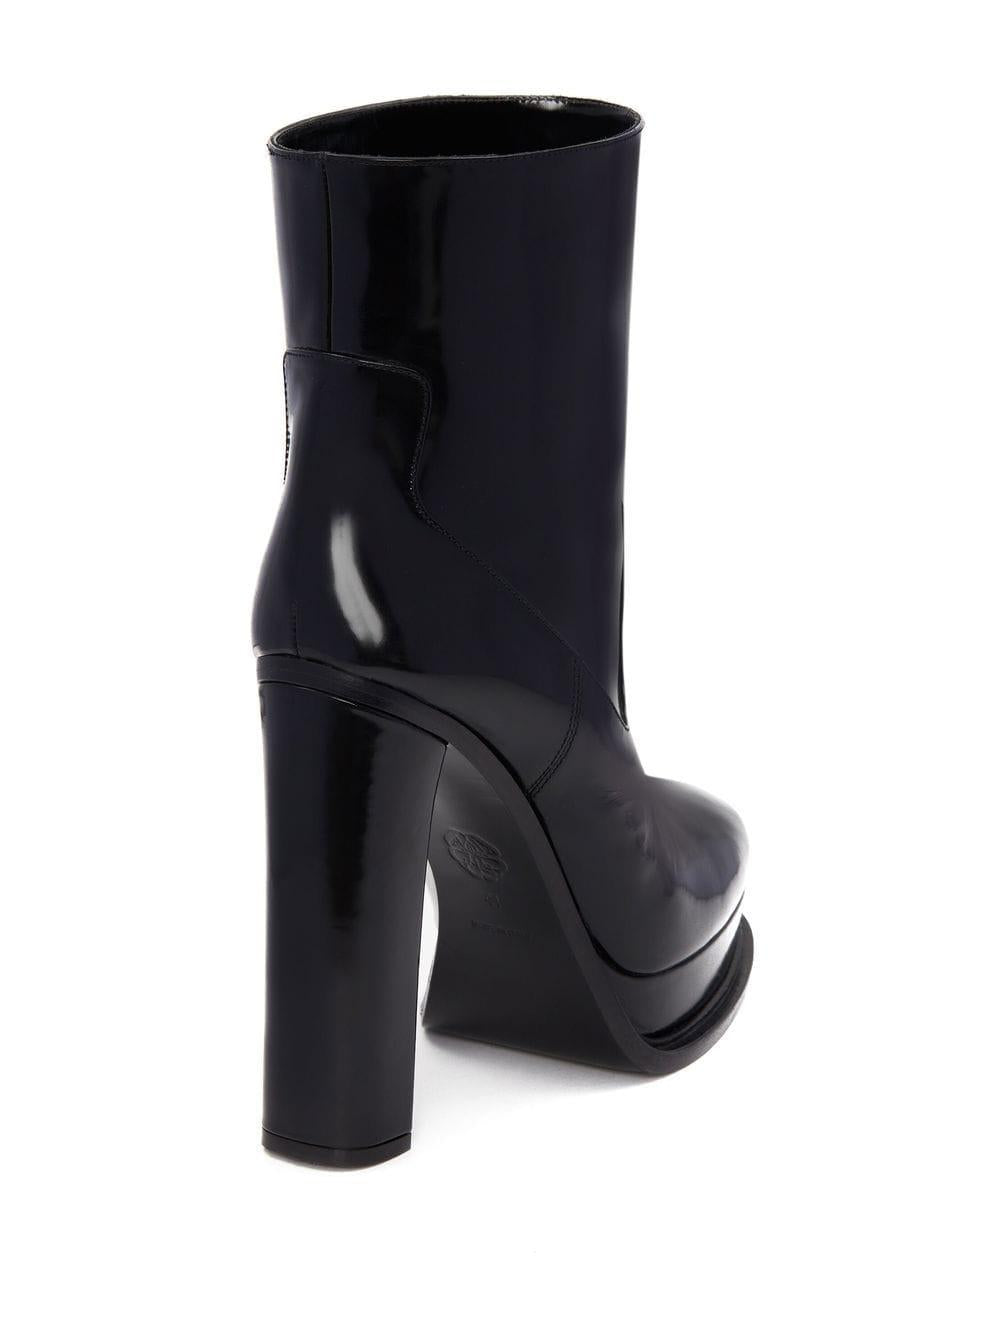 ALEXANDER MCQUEEN Stunning Black Ankle Boots for Women - SS23 Collection